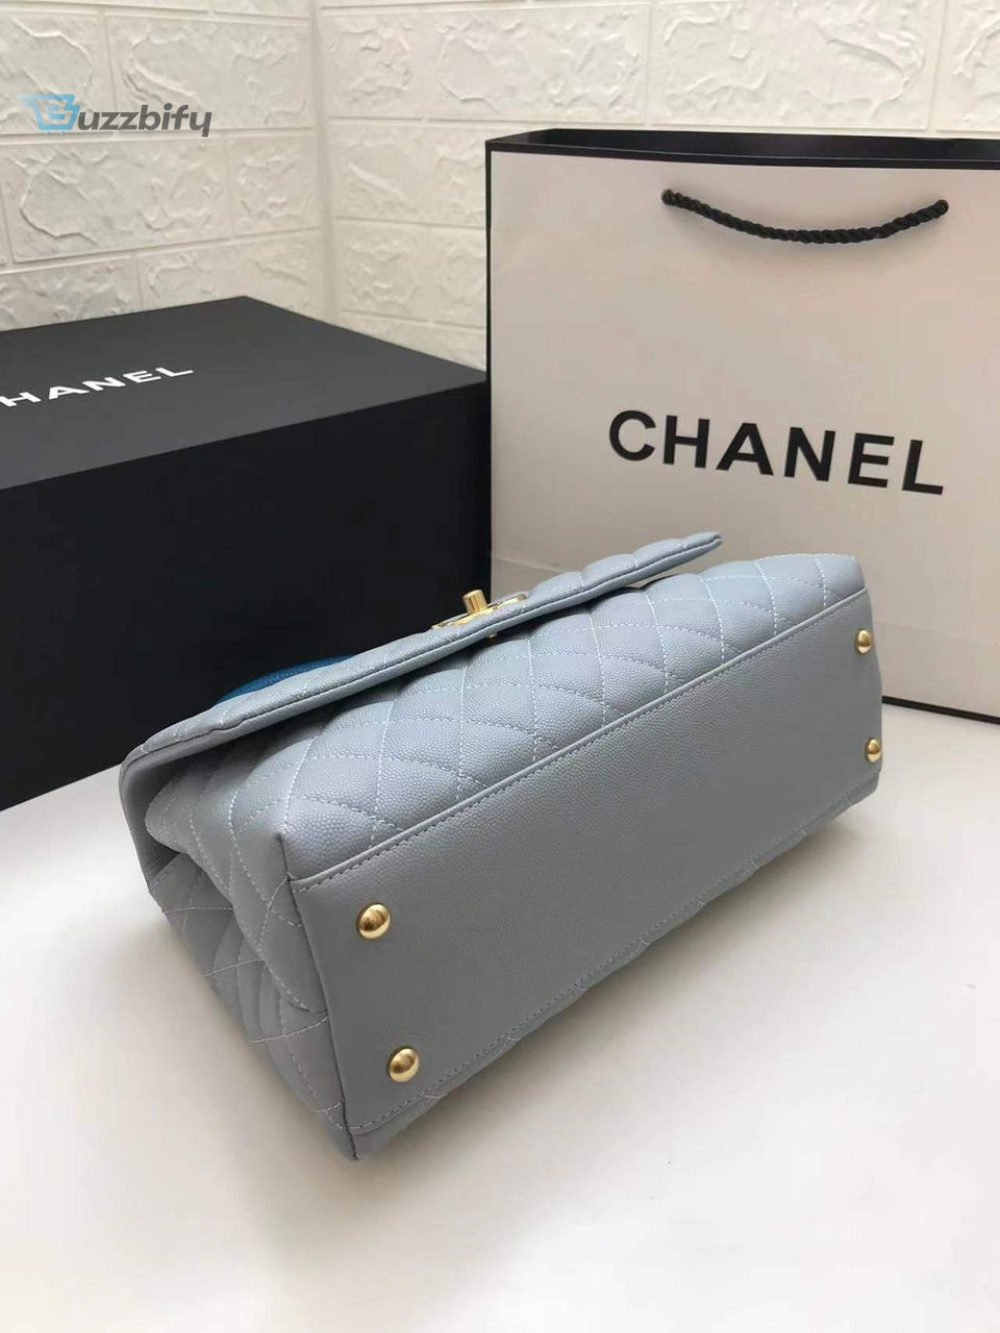 Chanel Large Flap Bag With Top Handle Light Grey For Women, Women’s Handbags, Shoulder And Crossbody Bags 11in/28cm A92991